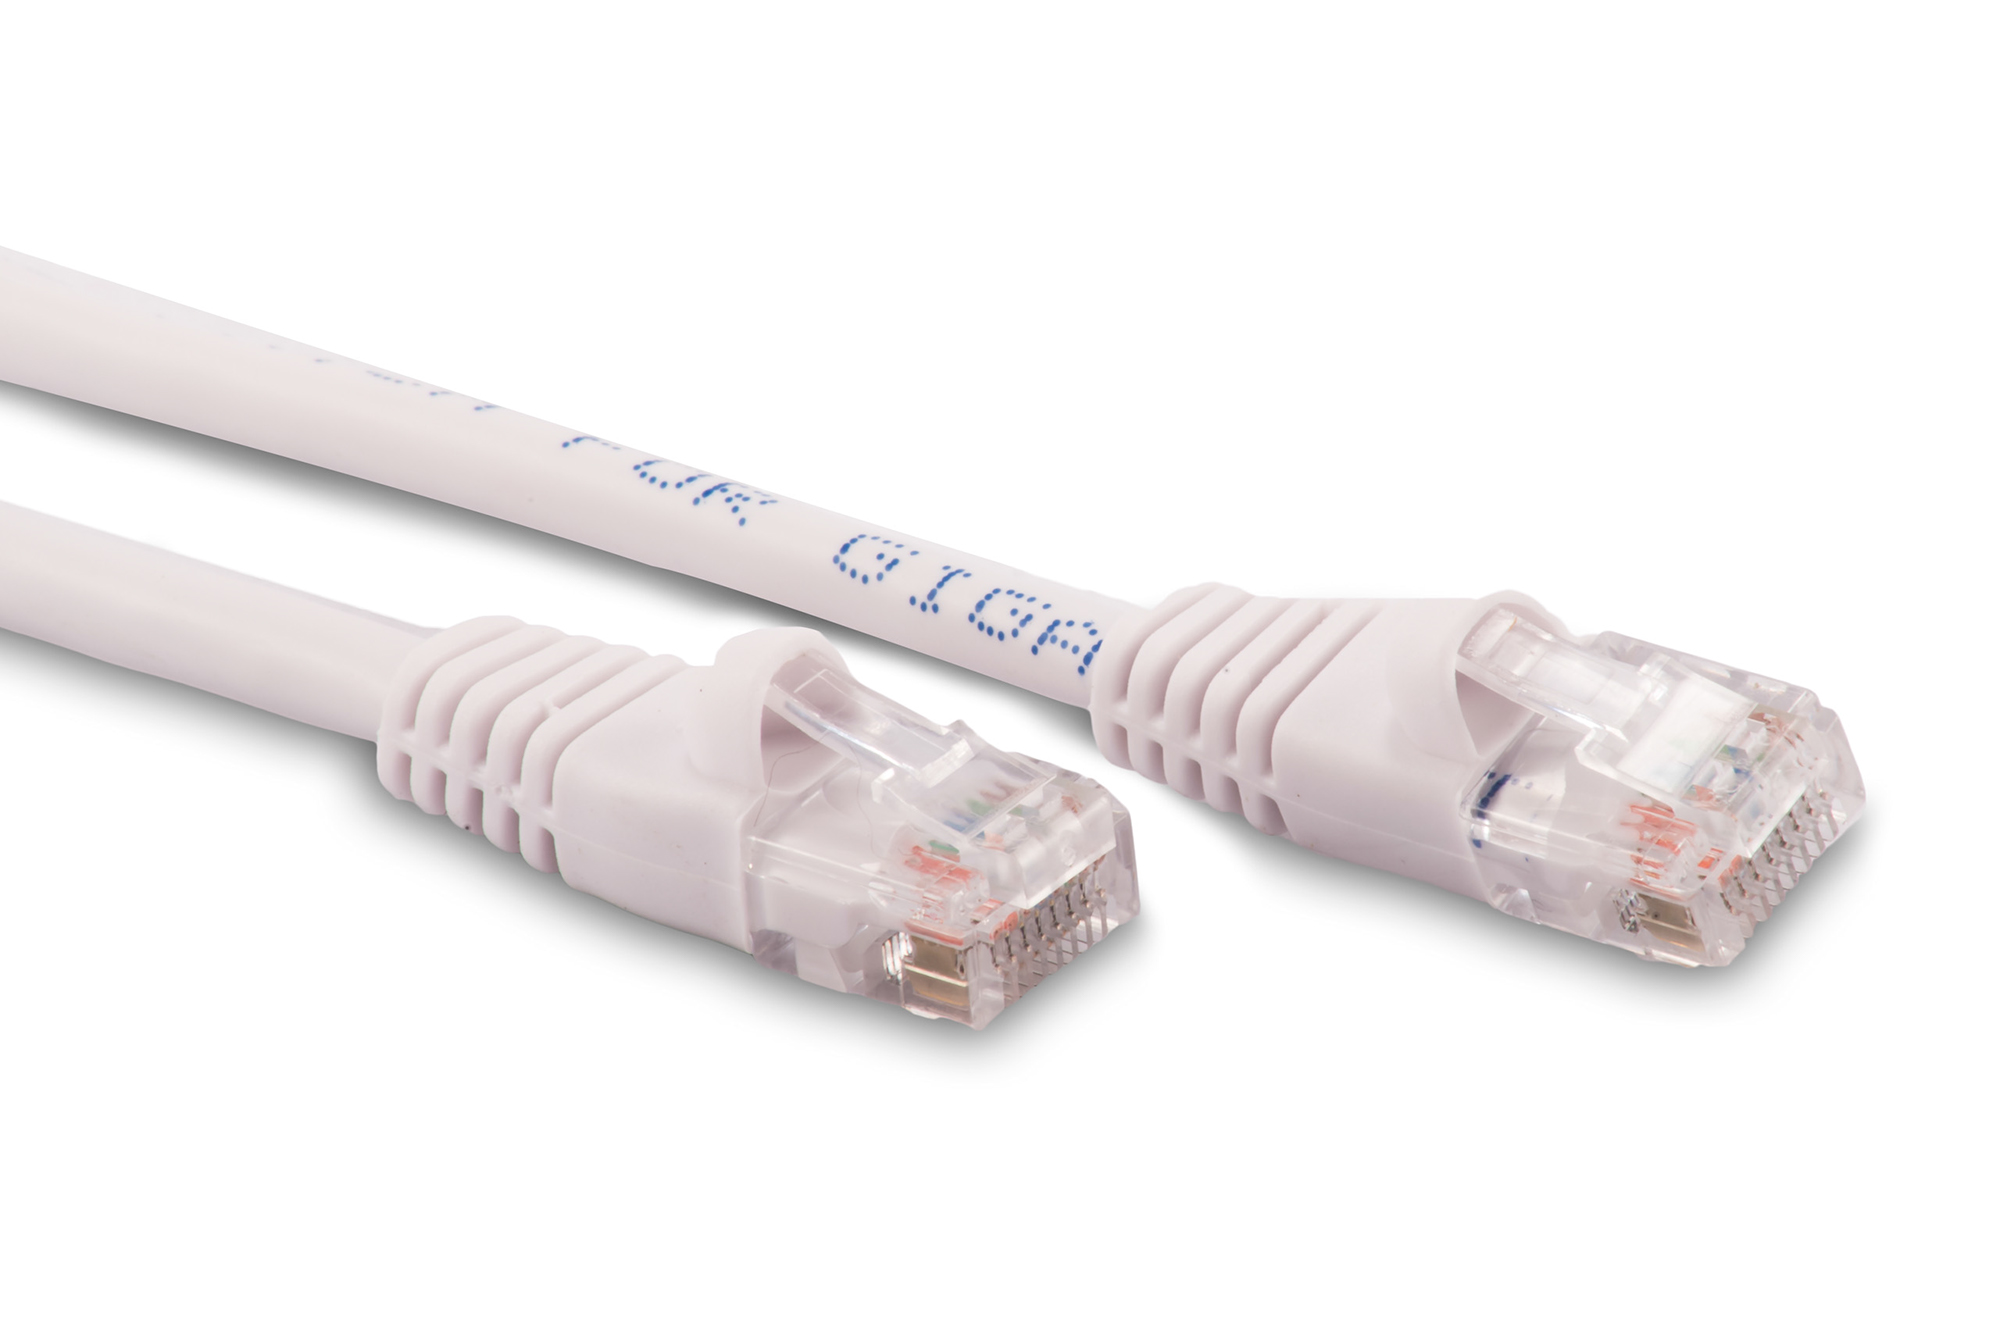 3ft Cat6 Ethernet Patch Cable - White Color - Snagless Boot, Stranded, RJ45, 550Mhz, 24AWG